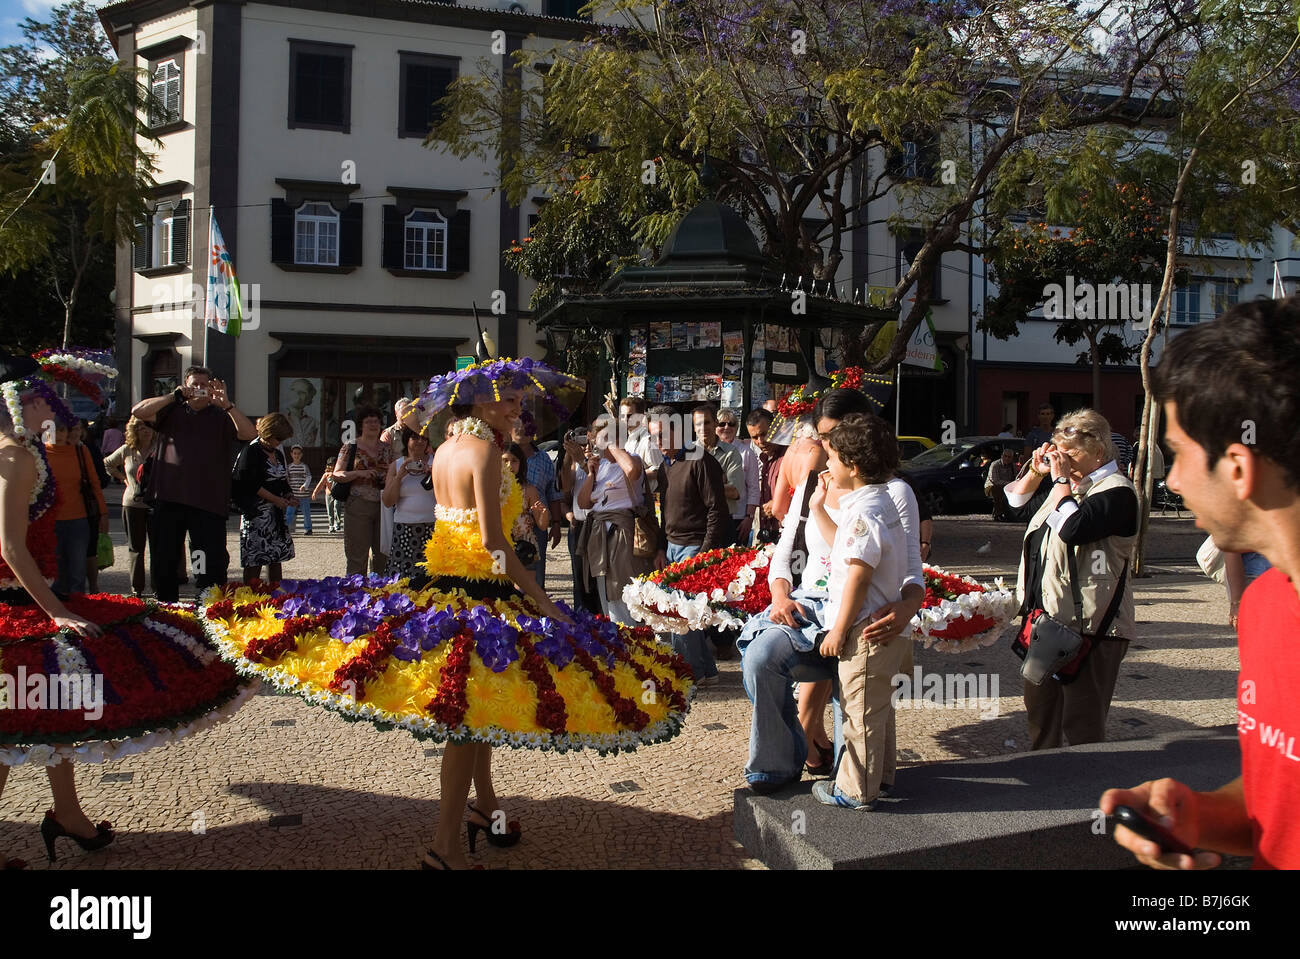 dh Flower Festival FUNCHAL MADEIRA Girl in flower costume talking to crowd girls Stock Photo